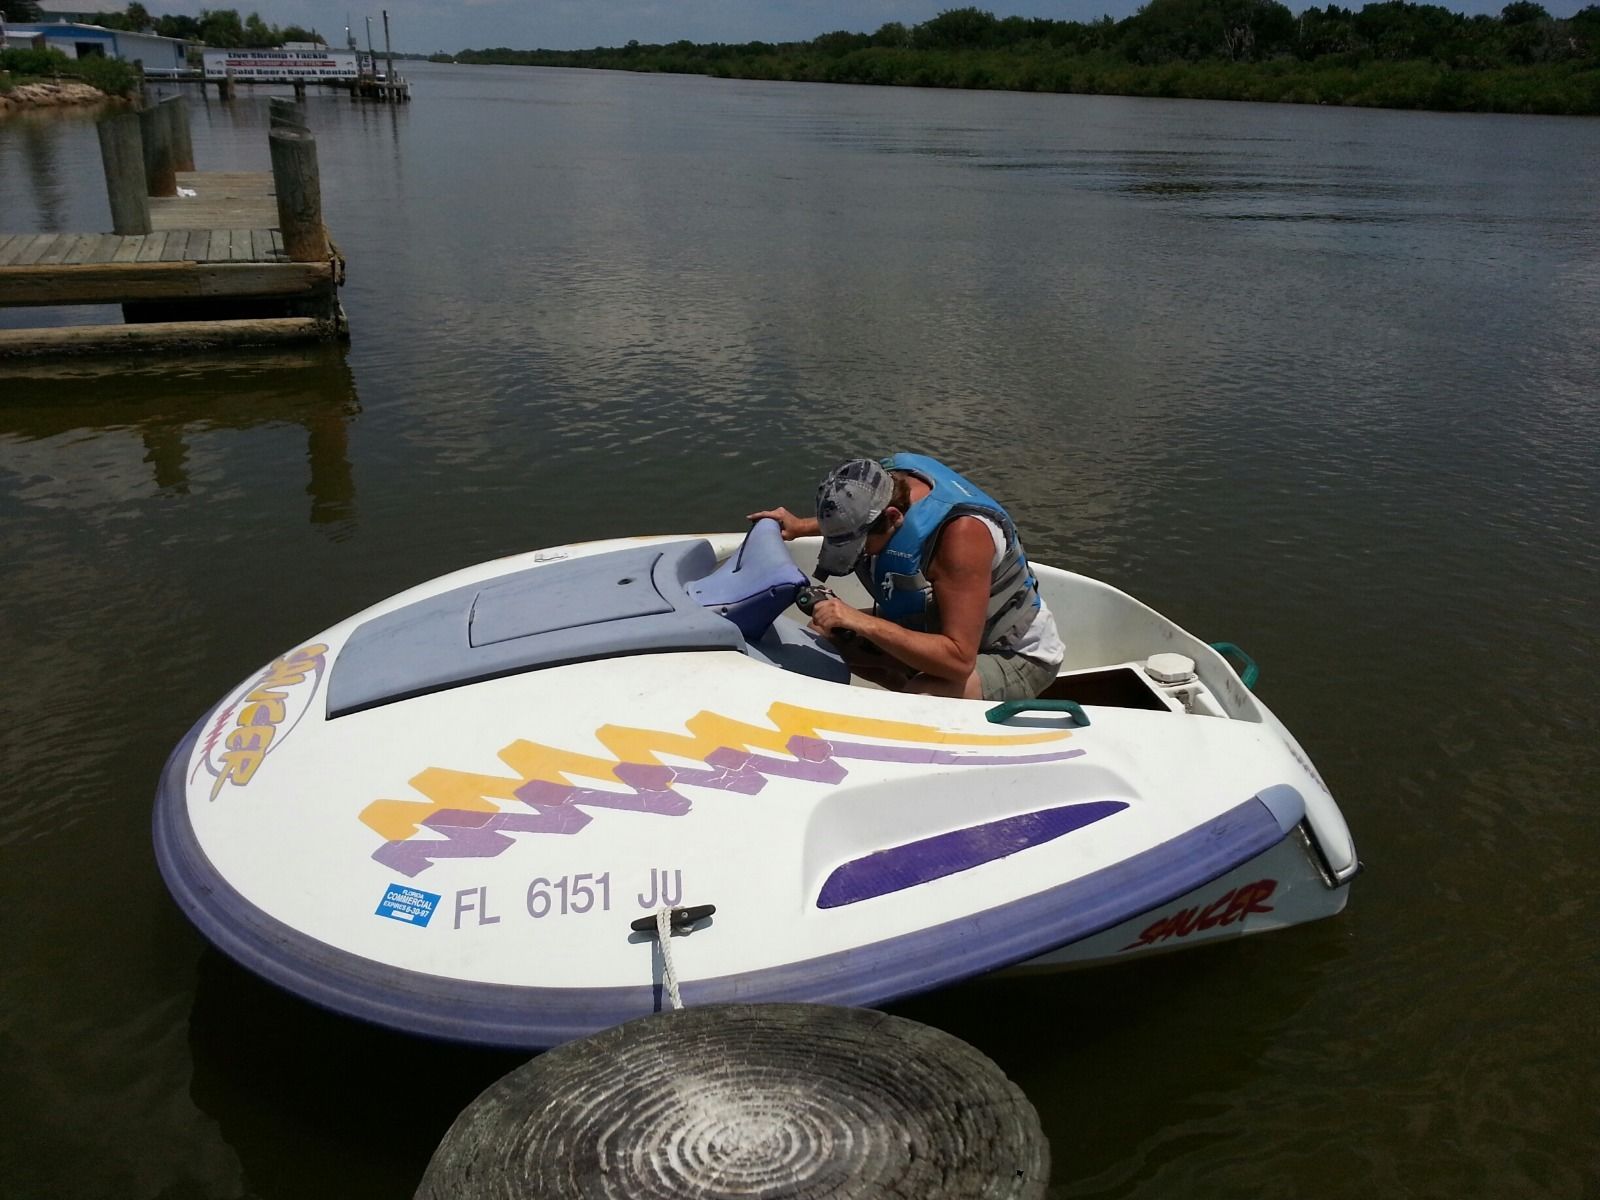 Yamaha SEA SAUCER 1996 for sale for $2,400 - Boats-from ...